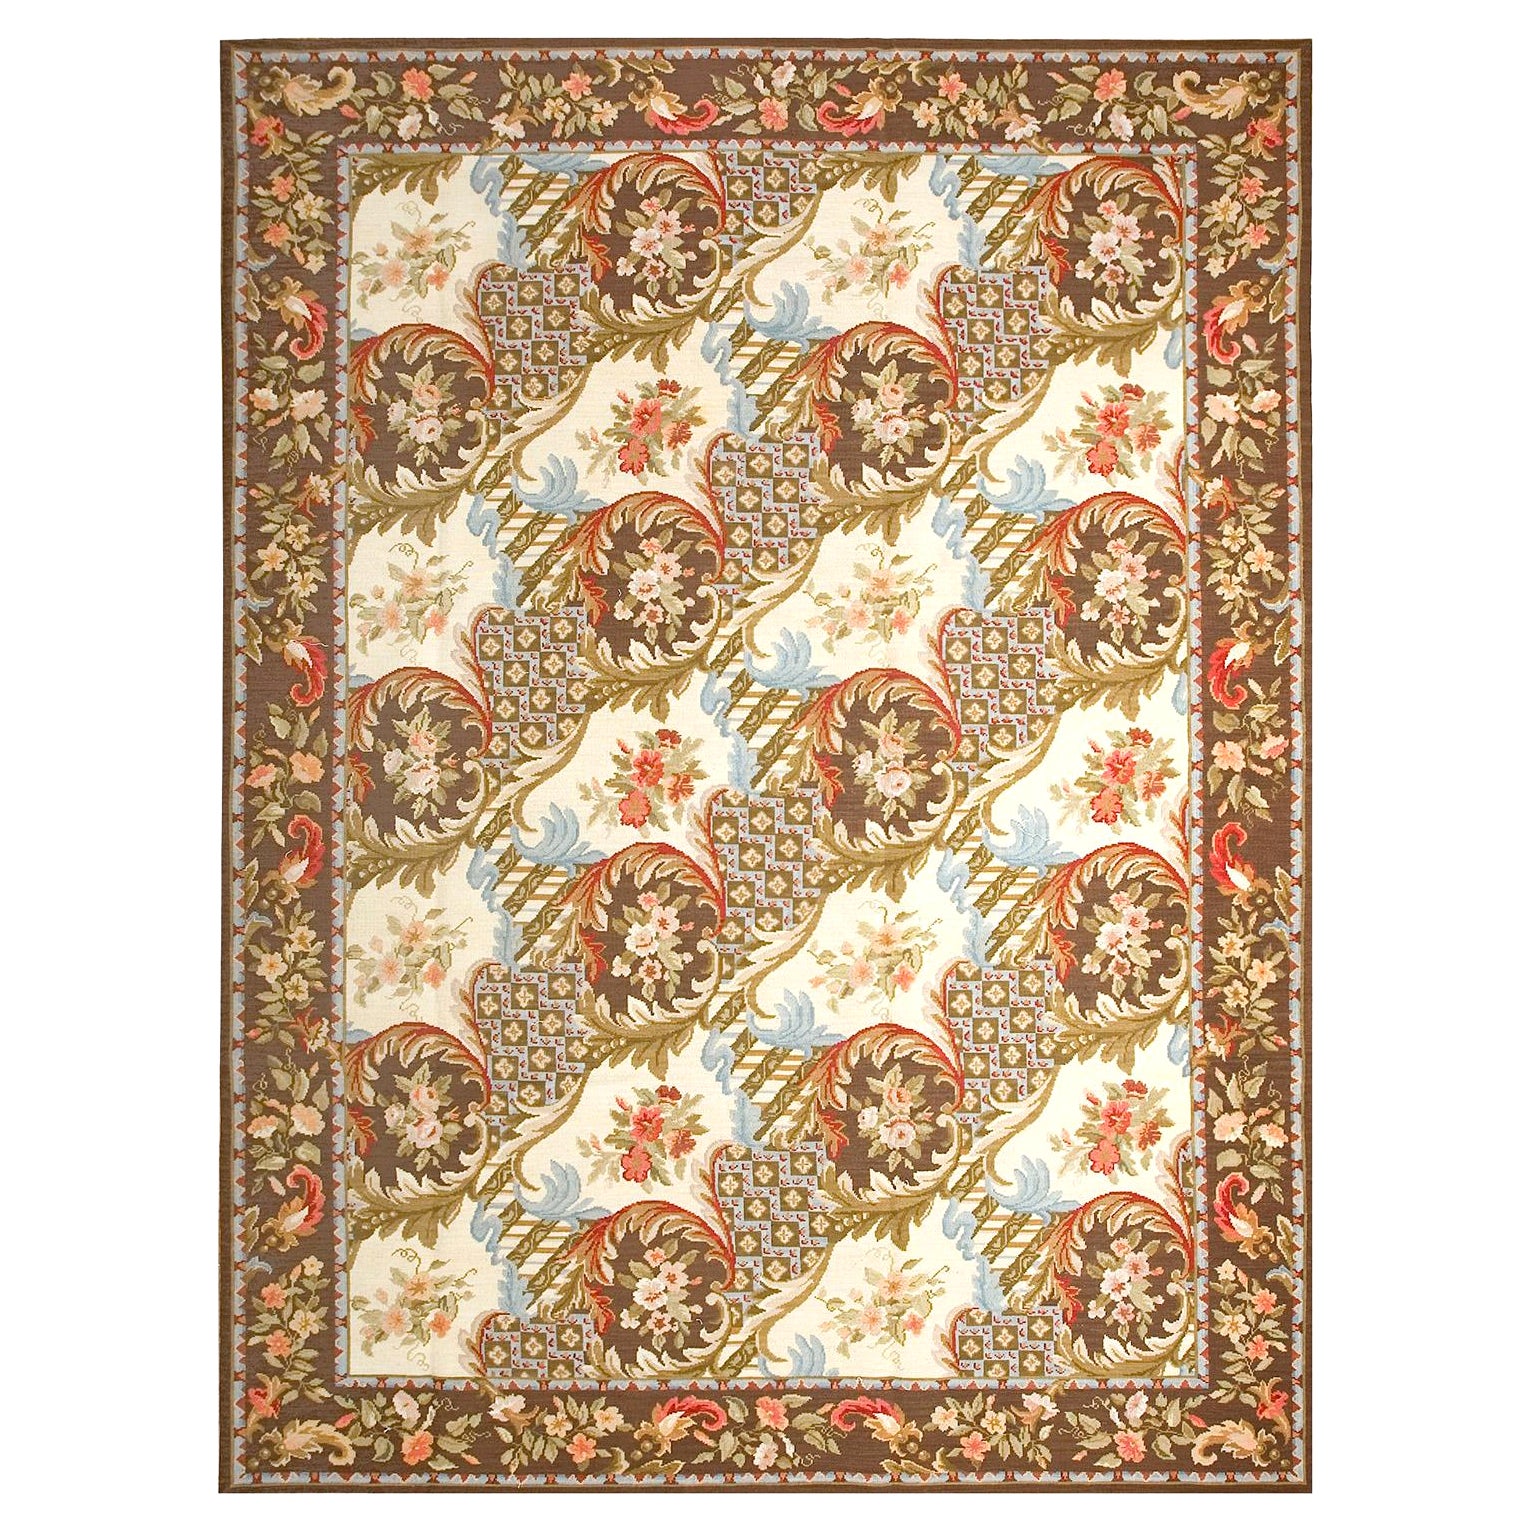 Contemperory Needlepoint Carpet ( 9' x 12' - 275 x 365 )  For Sale